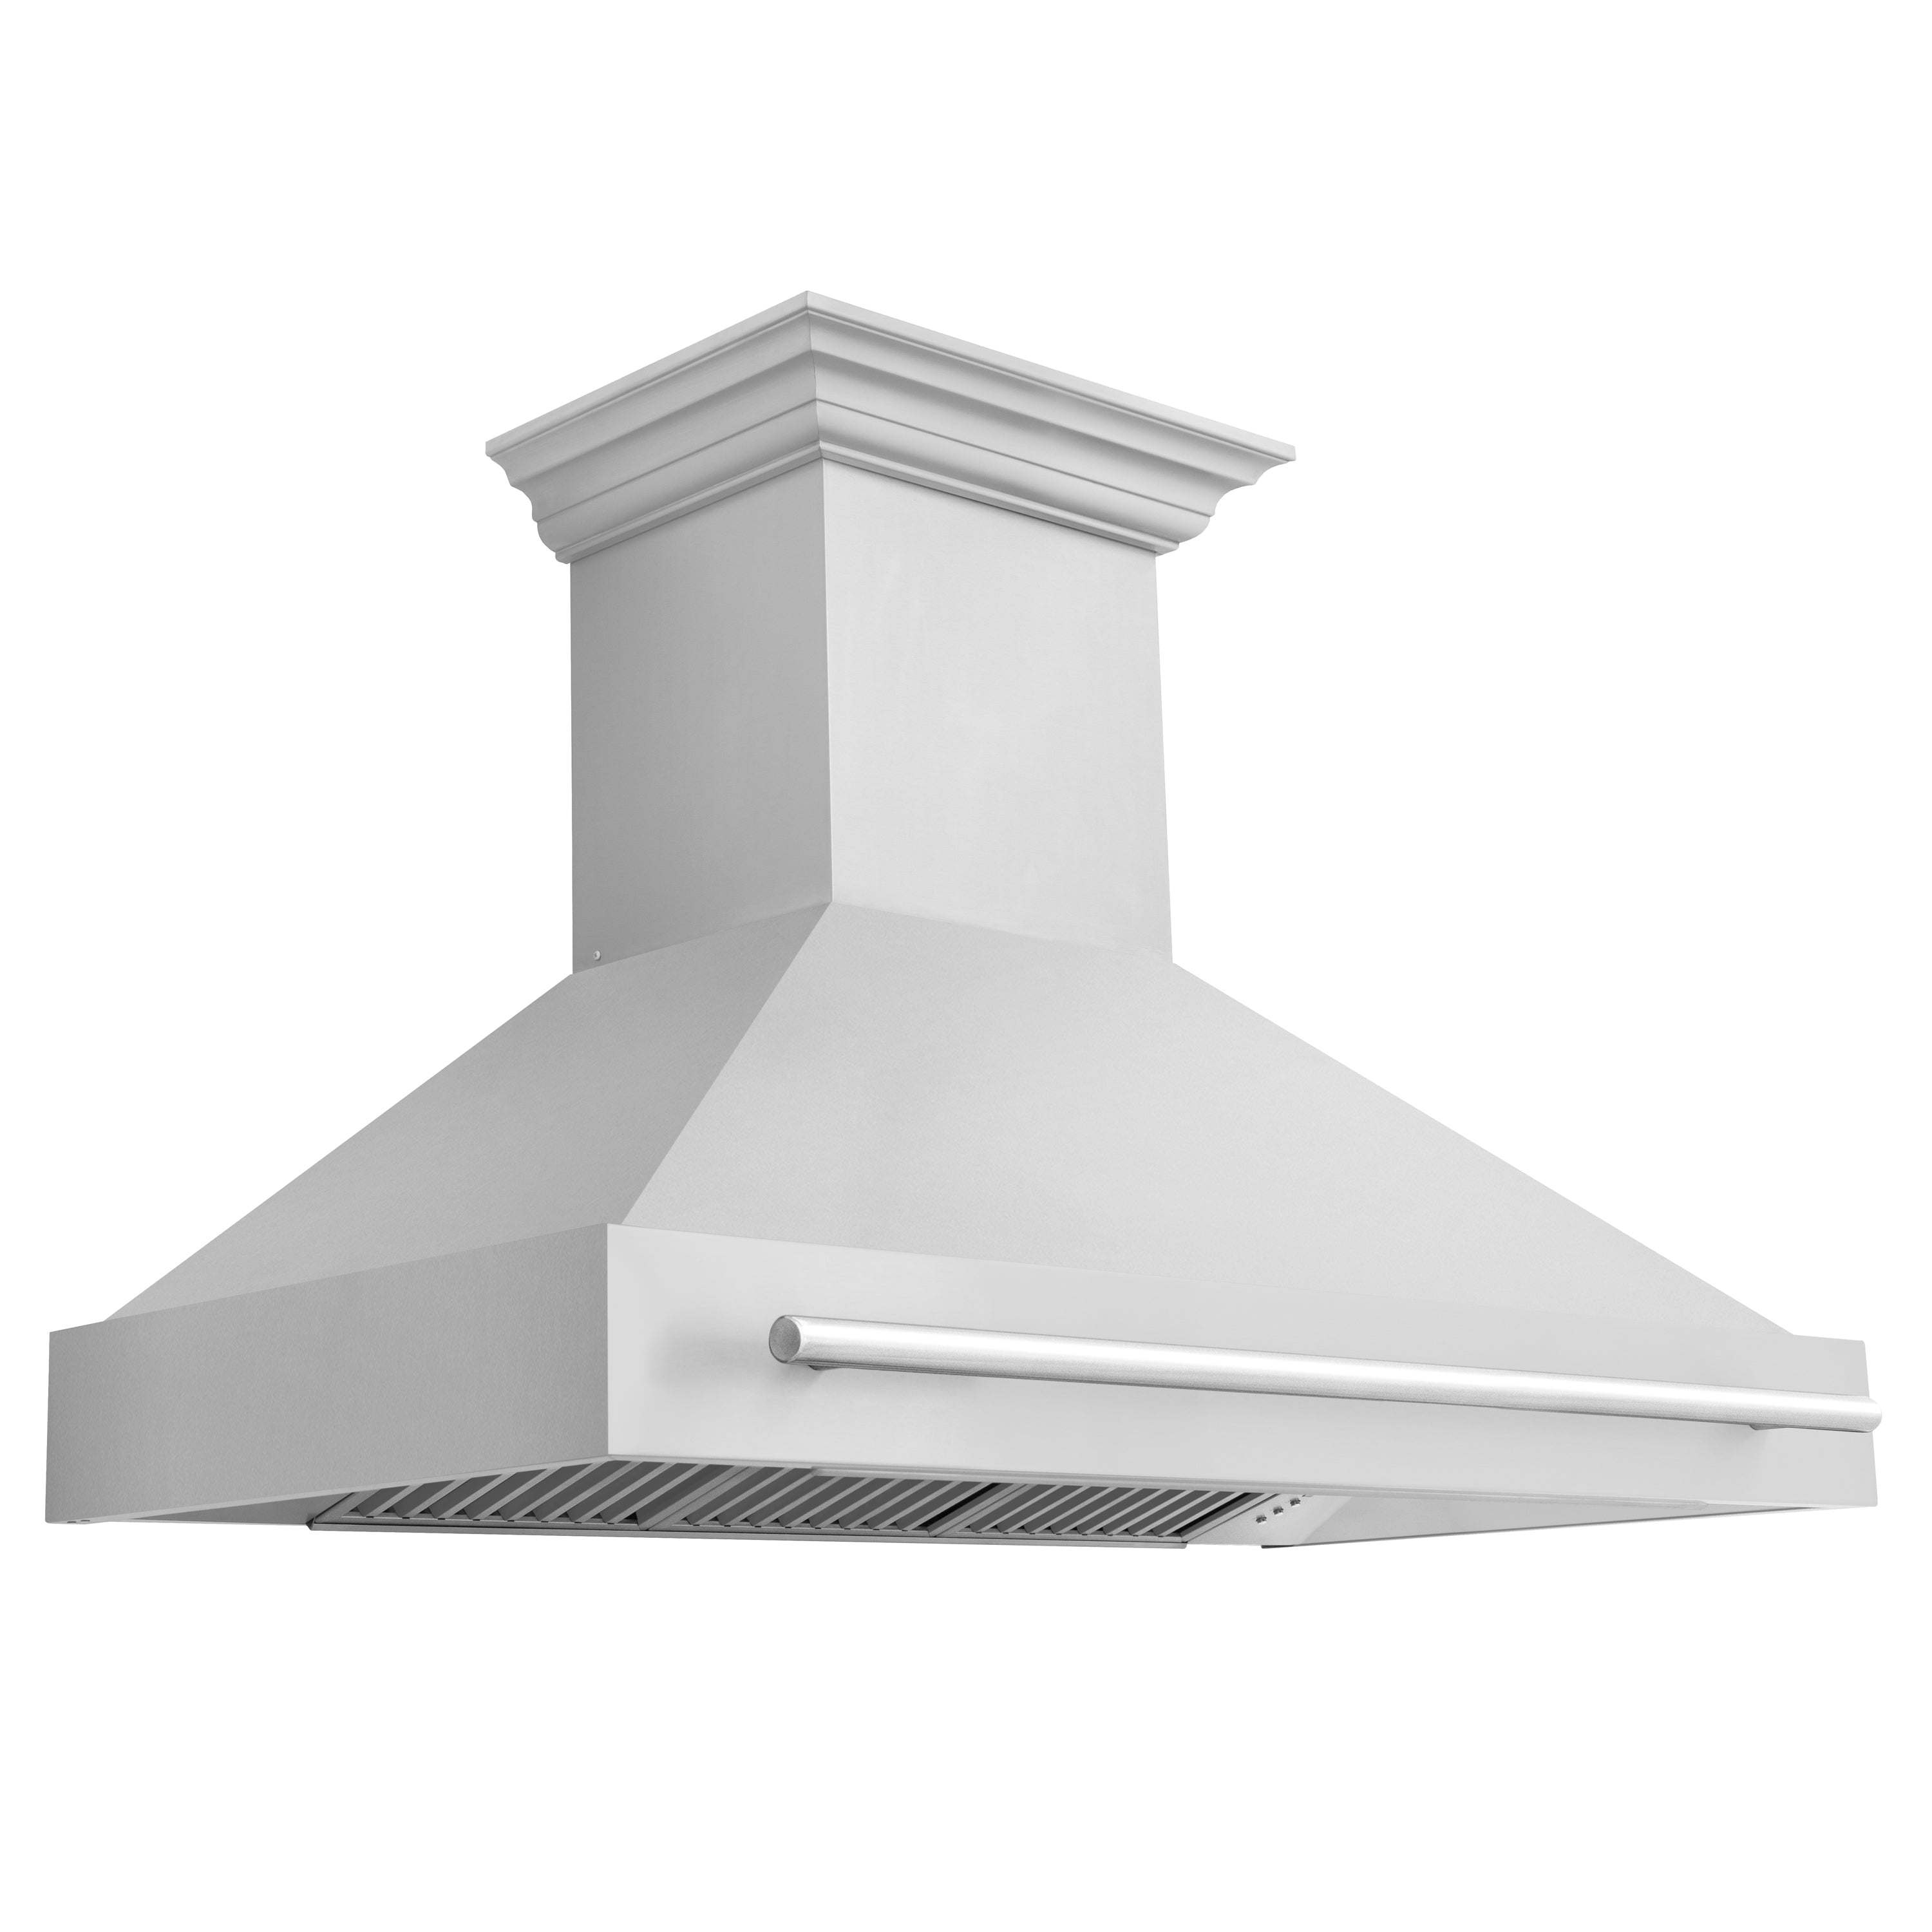 ZLINE 48 in. Stainless Steel Range Hood with Stainless Steel Handle (8654STX-48) Stainless Steel